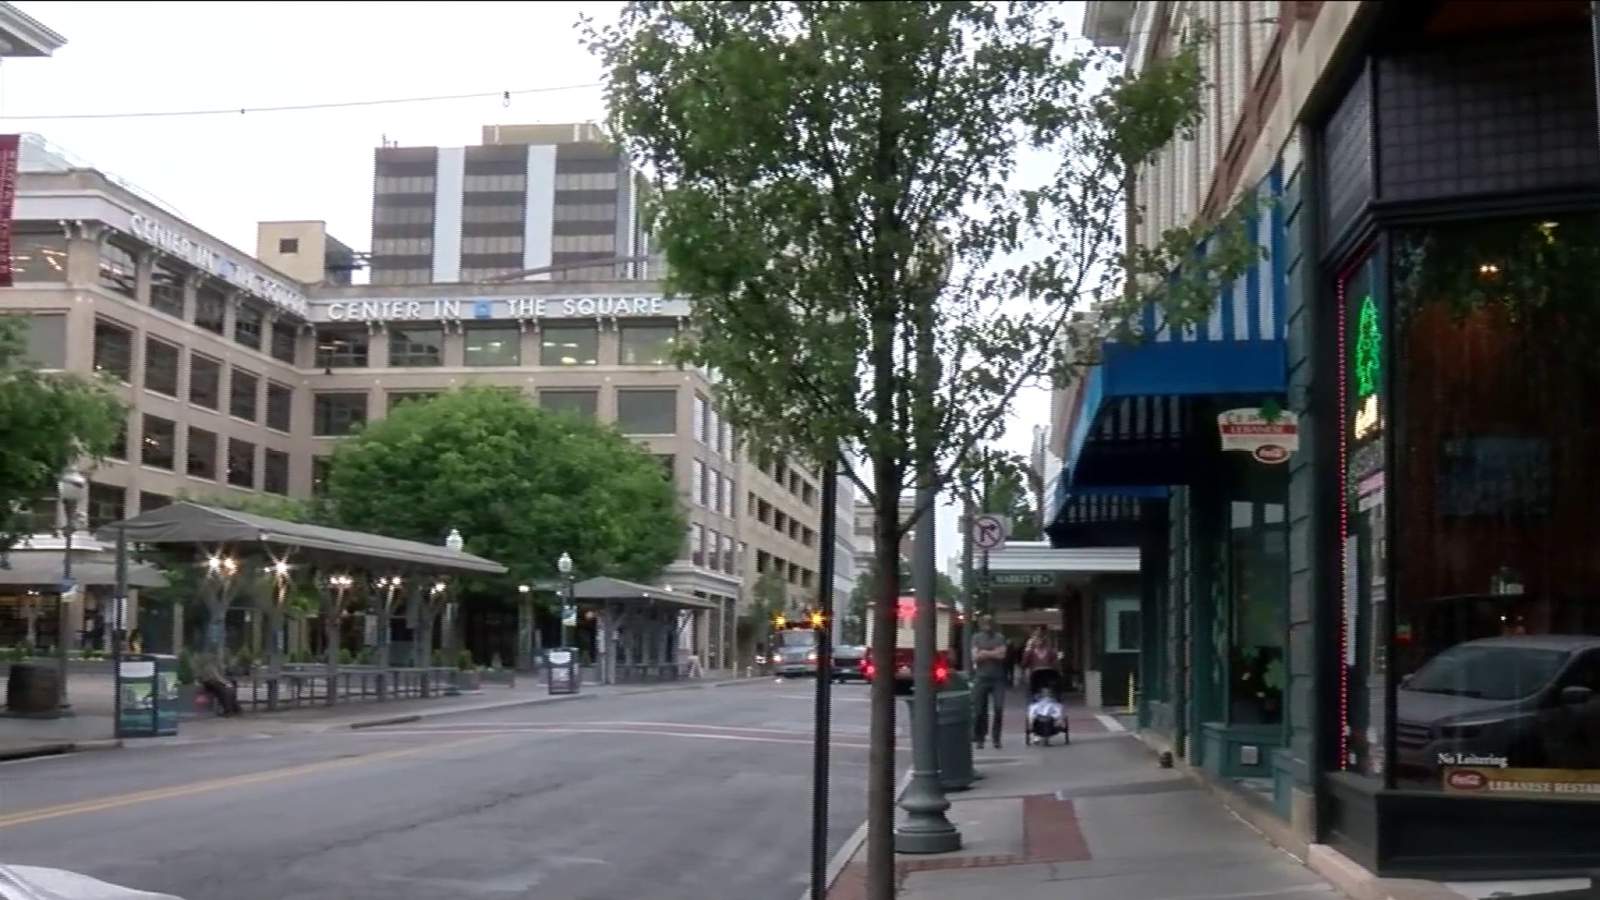 New wayfinding system coming to downtown Roanoke